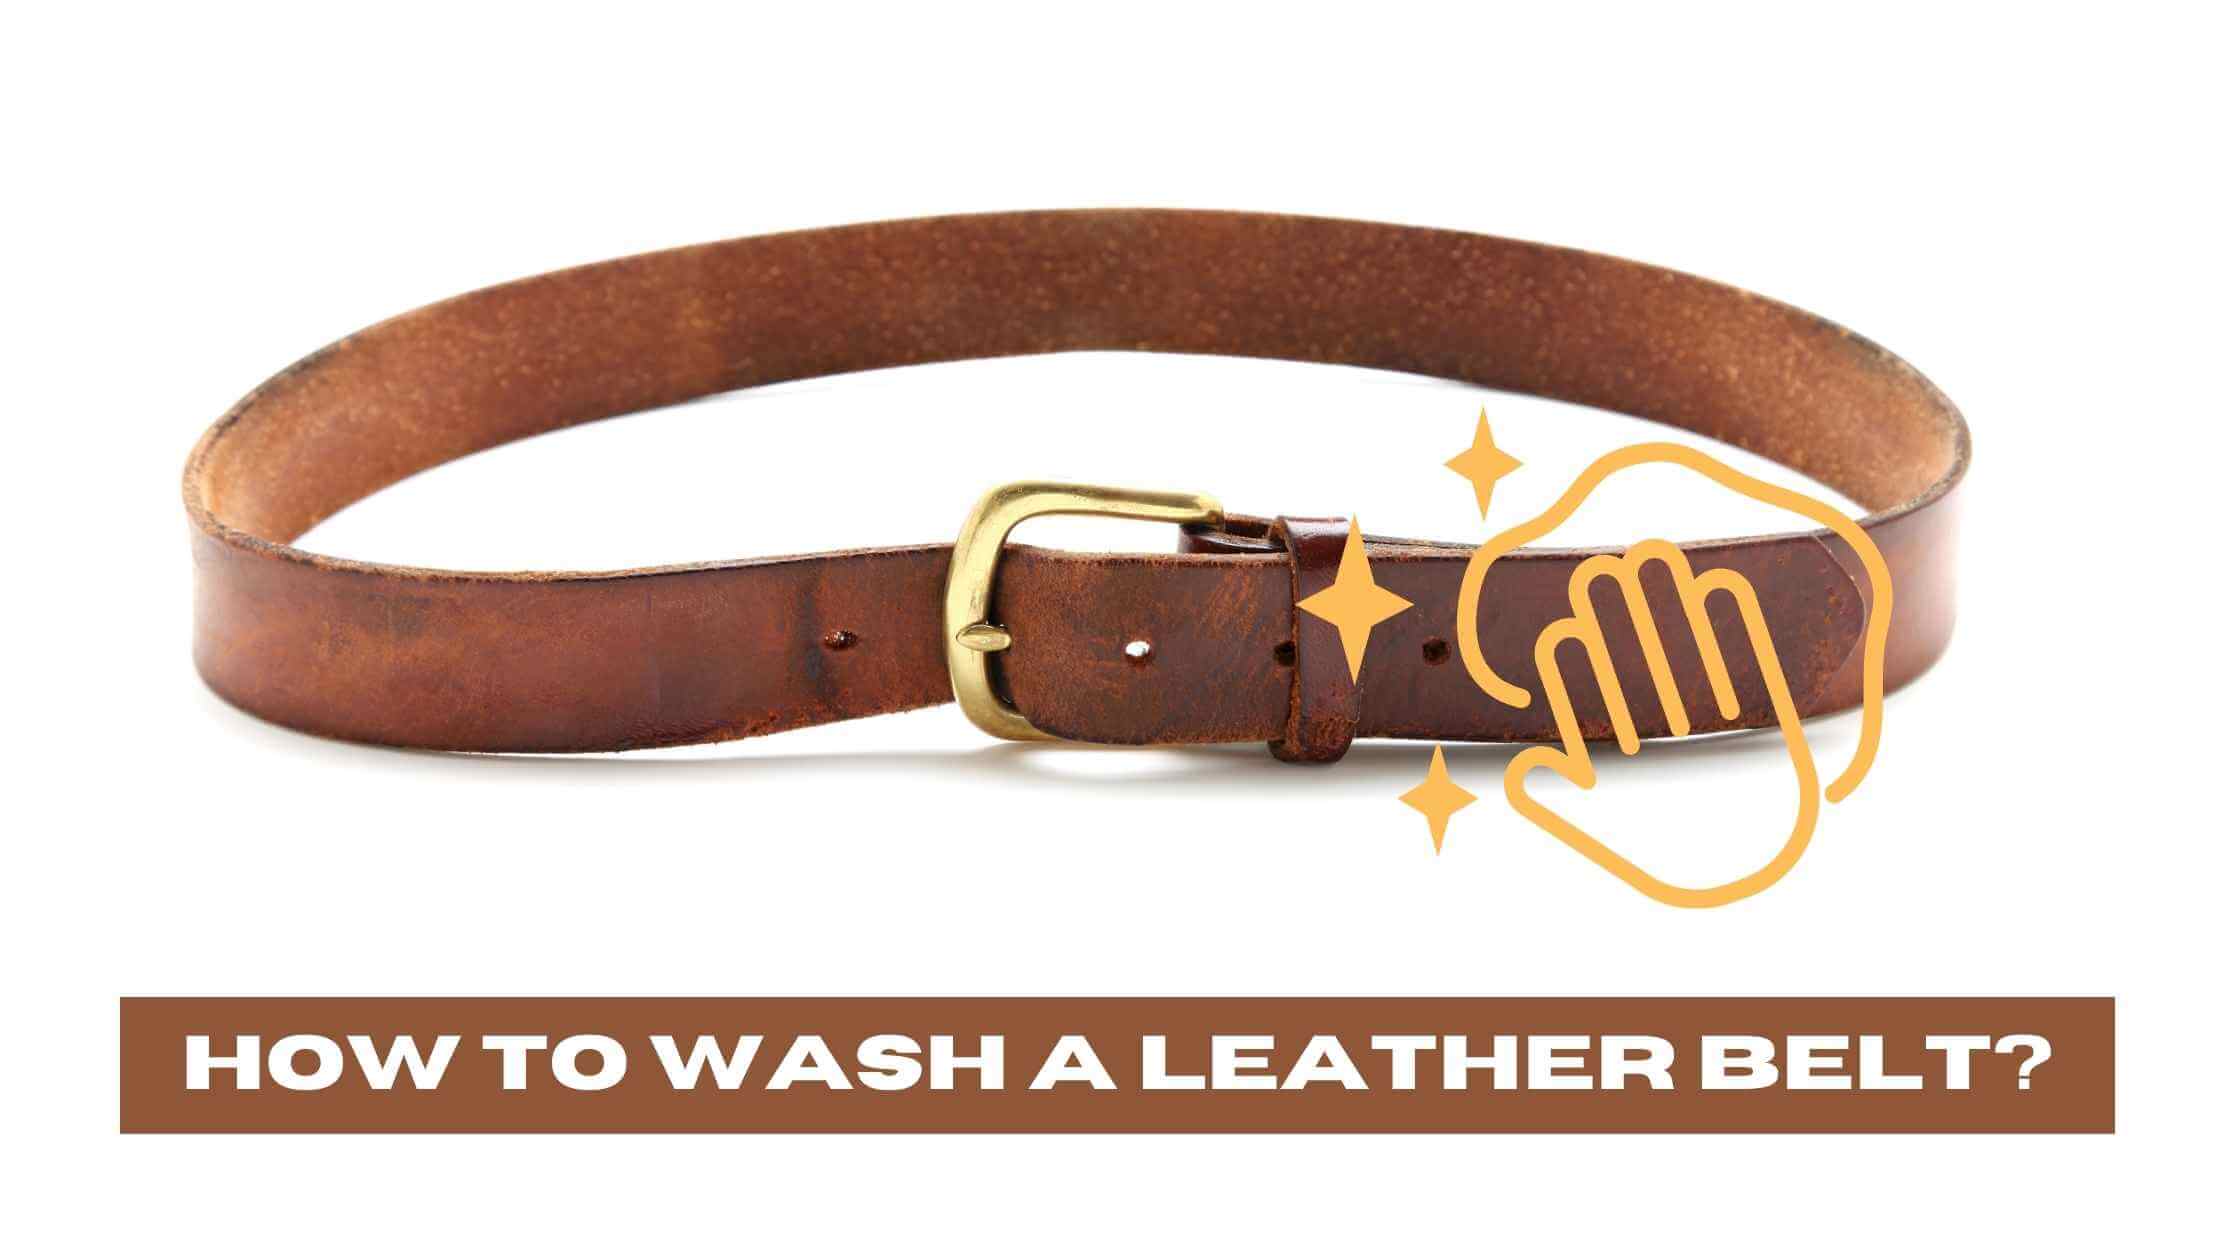 How to Wash a Leather Belt